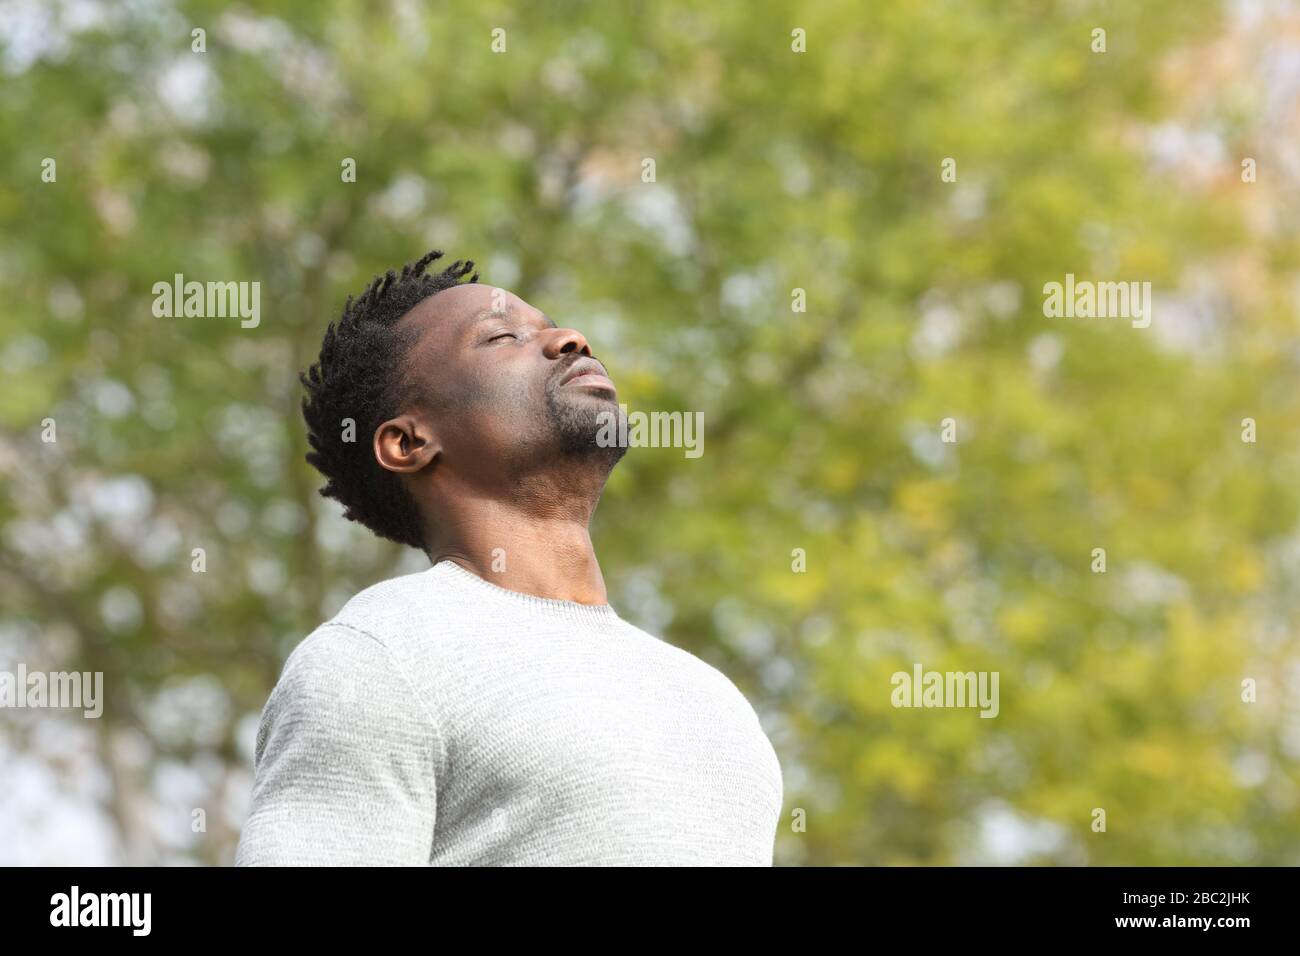 Black serious man breathing deeply fresh air in a park a sunny day with a green tree in the background Stock Photo